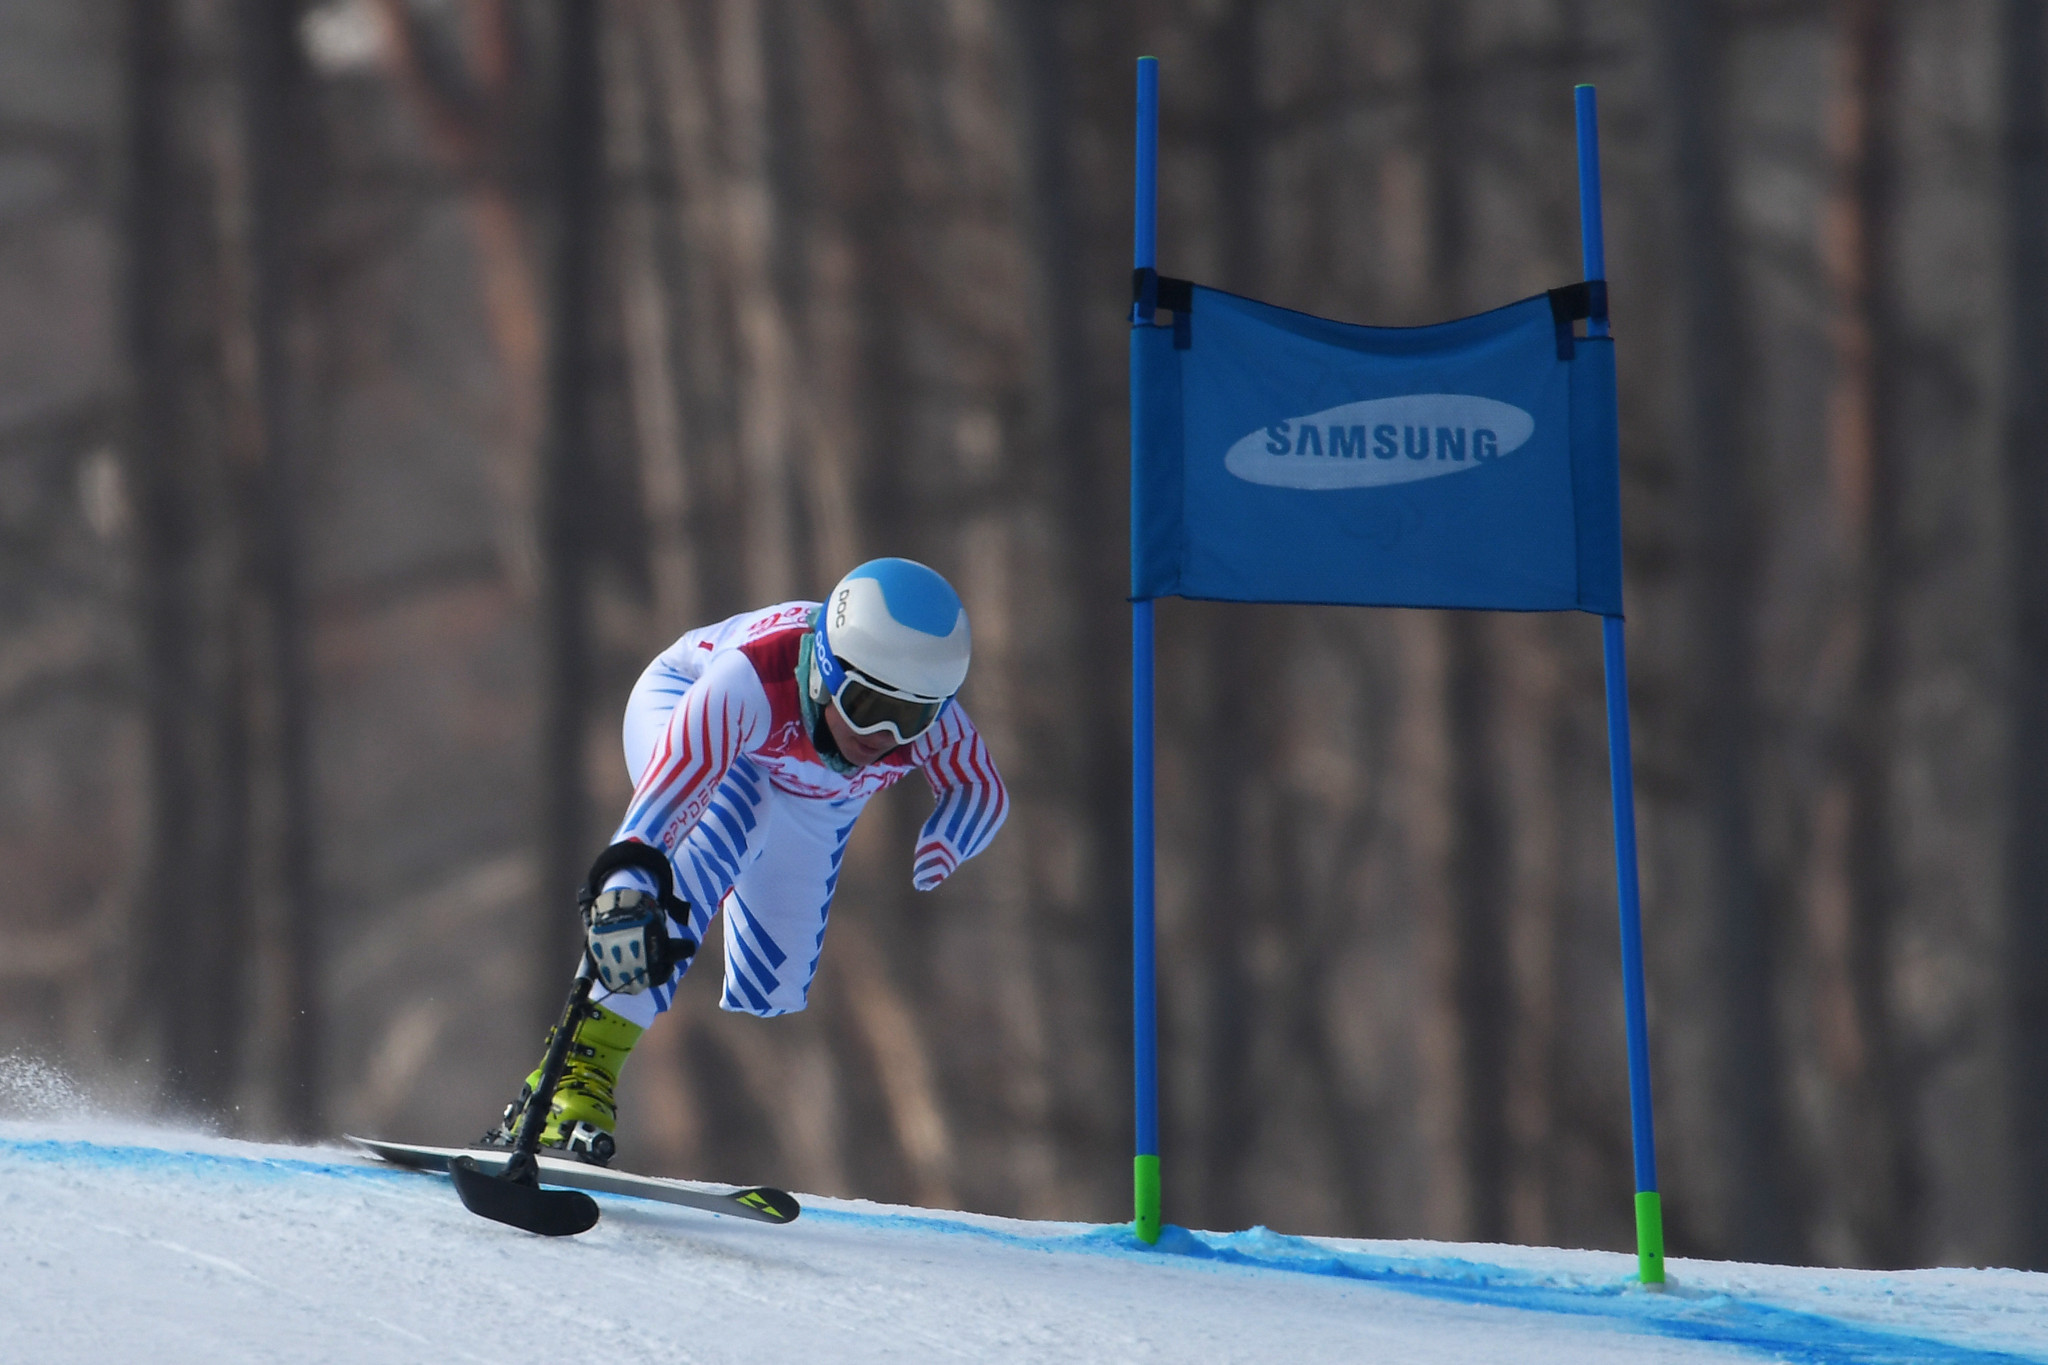 Stephanie Jallen in action during the women's downhill standing event at Jeongseon Alpine Centre ©Getty Images